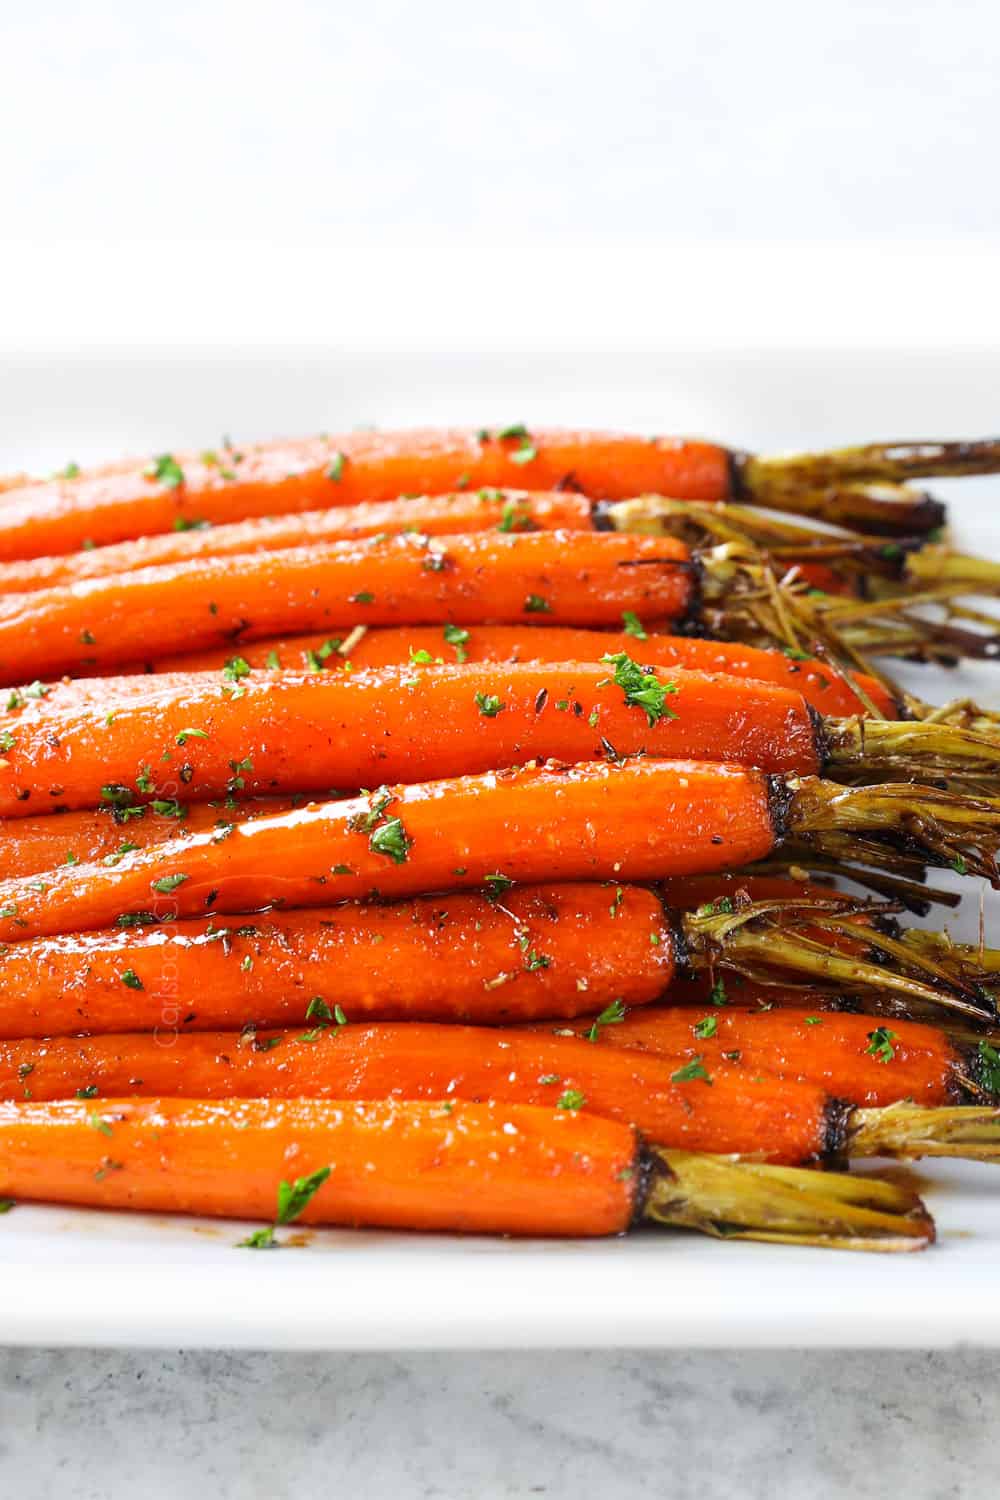 oven roasted carrots served in a white dish